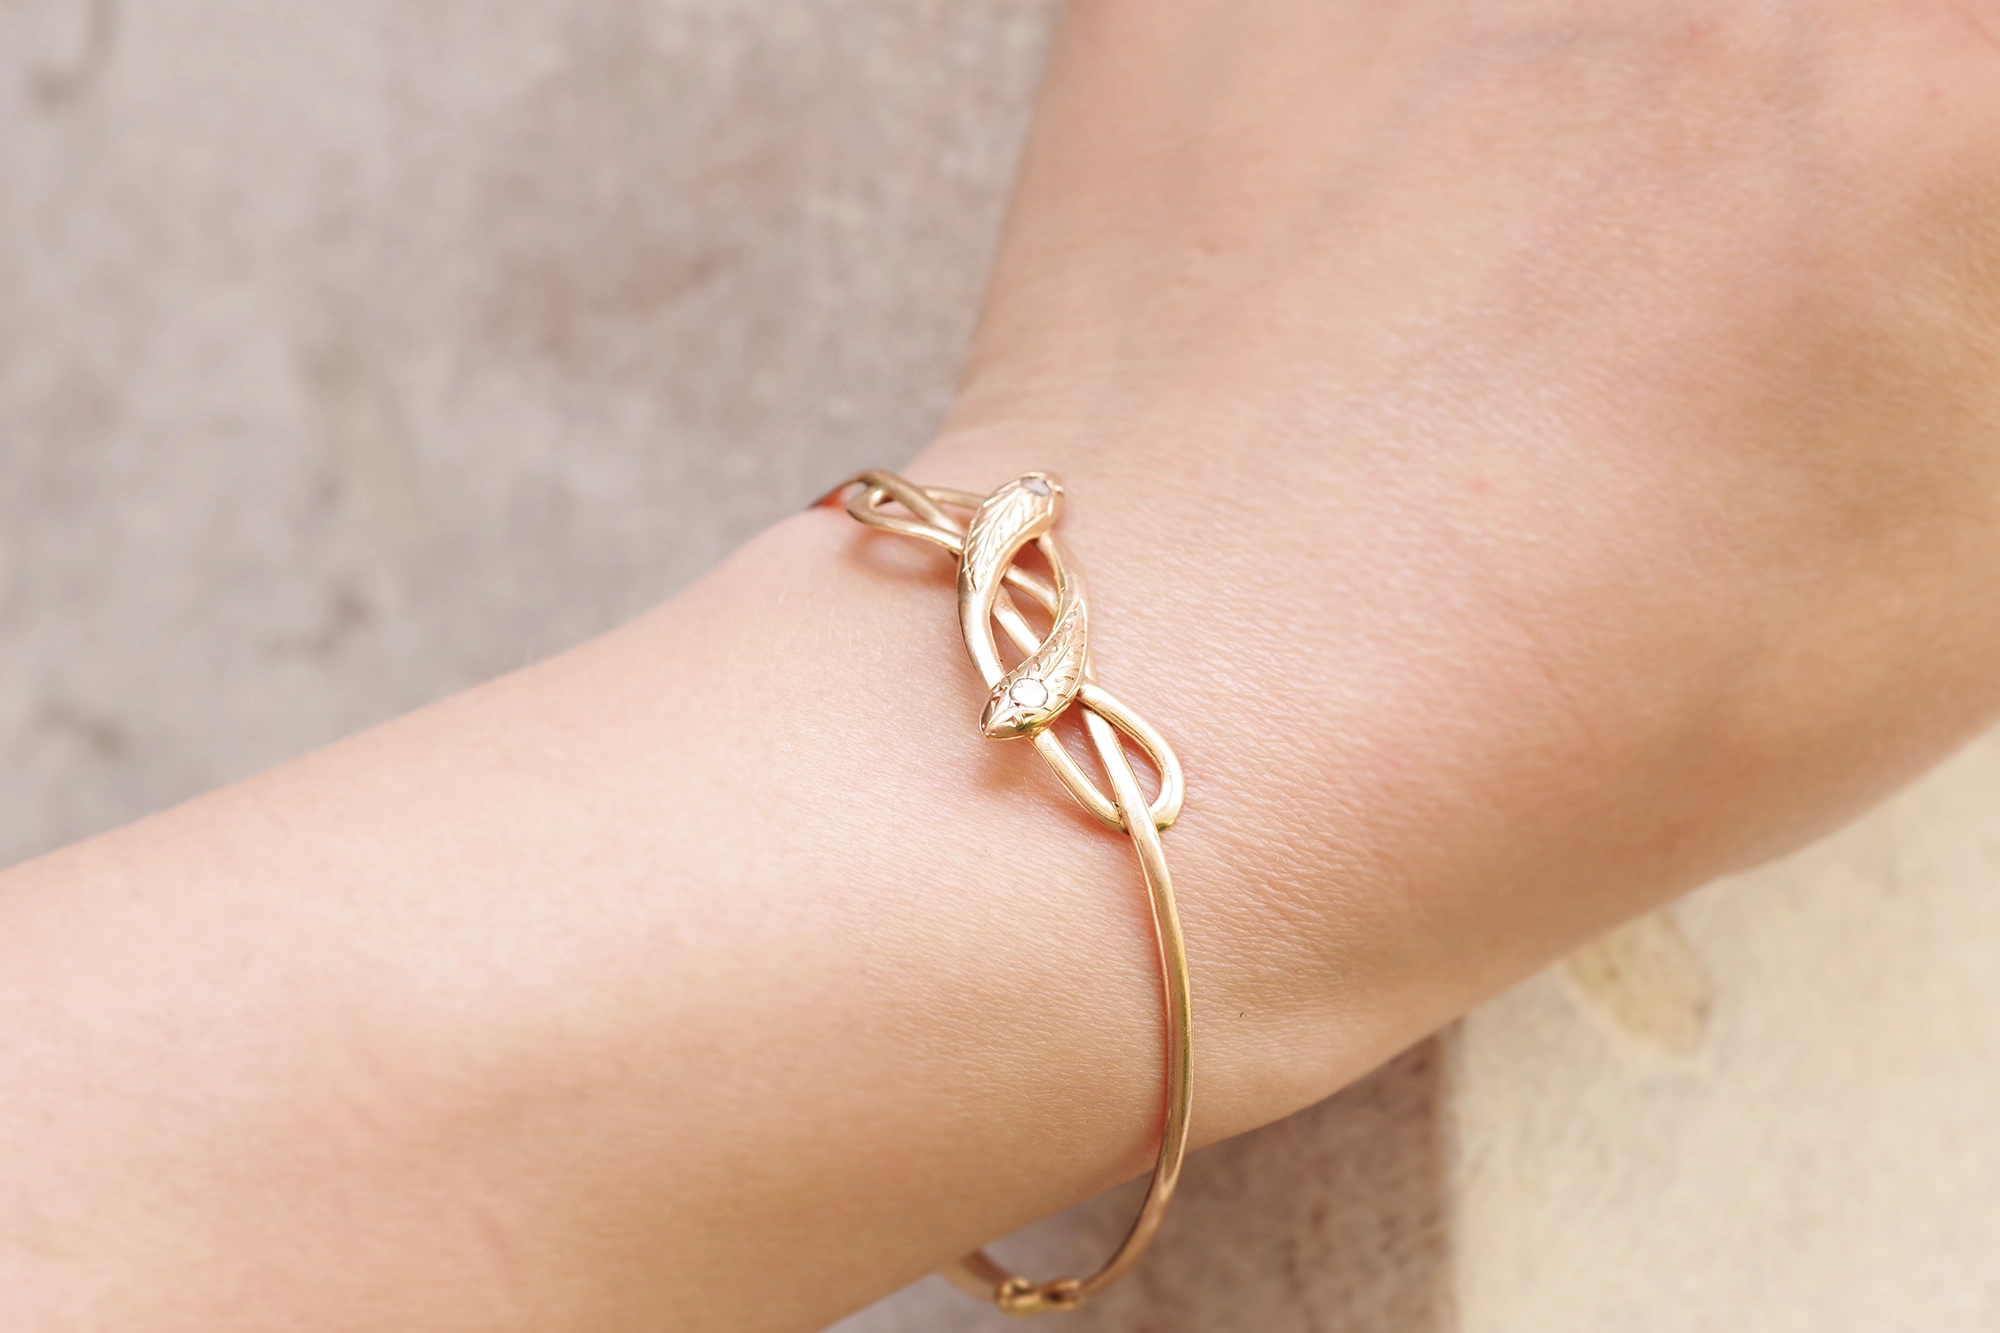 Victorian Snake Wrapped Bangle Bracelet with Diamonds in 14K Gold